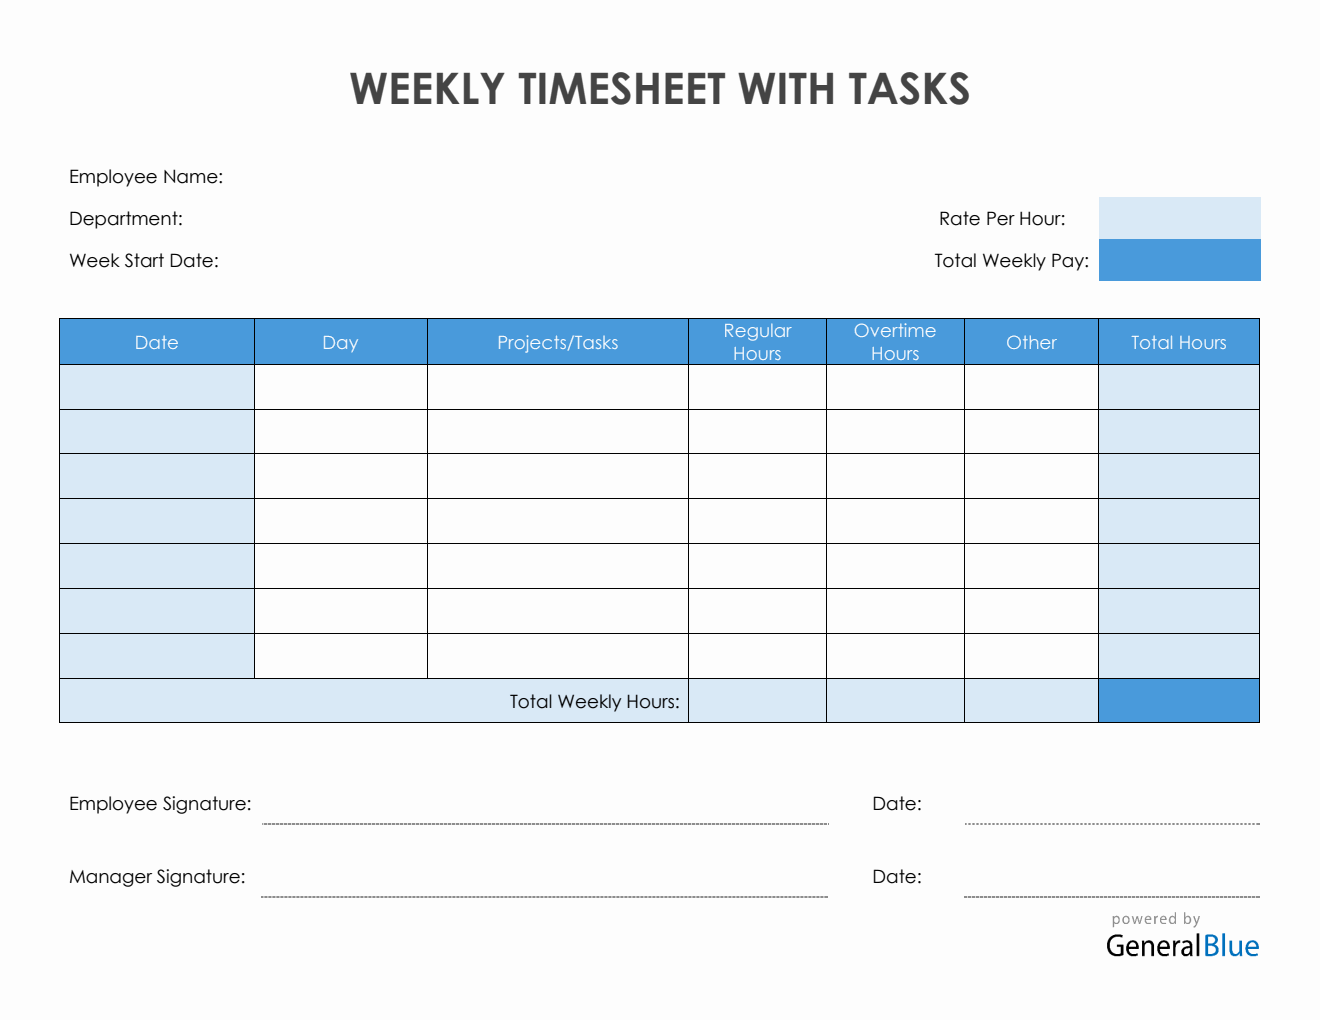 Weekly Timesheet With Tasks in PDF